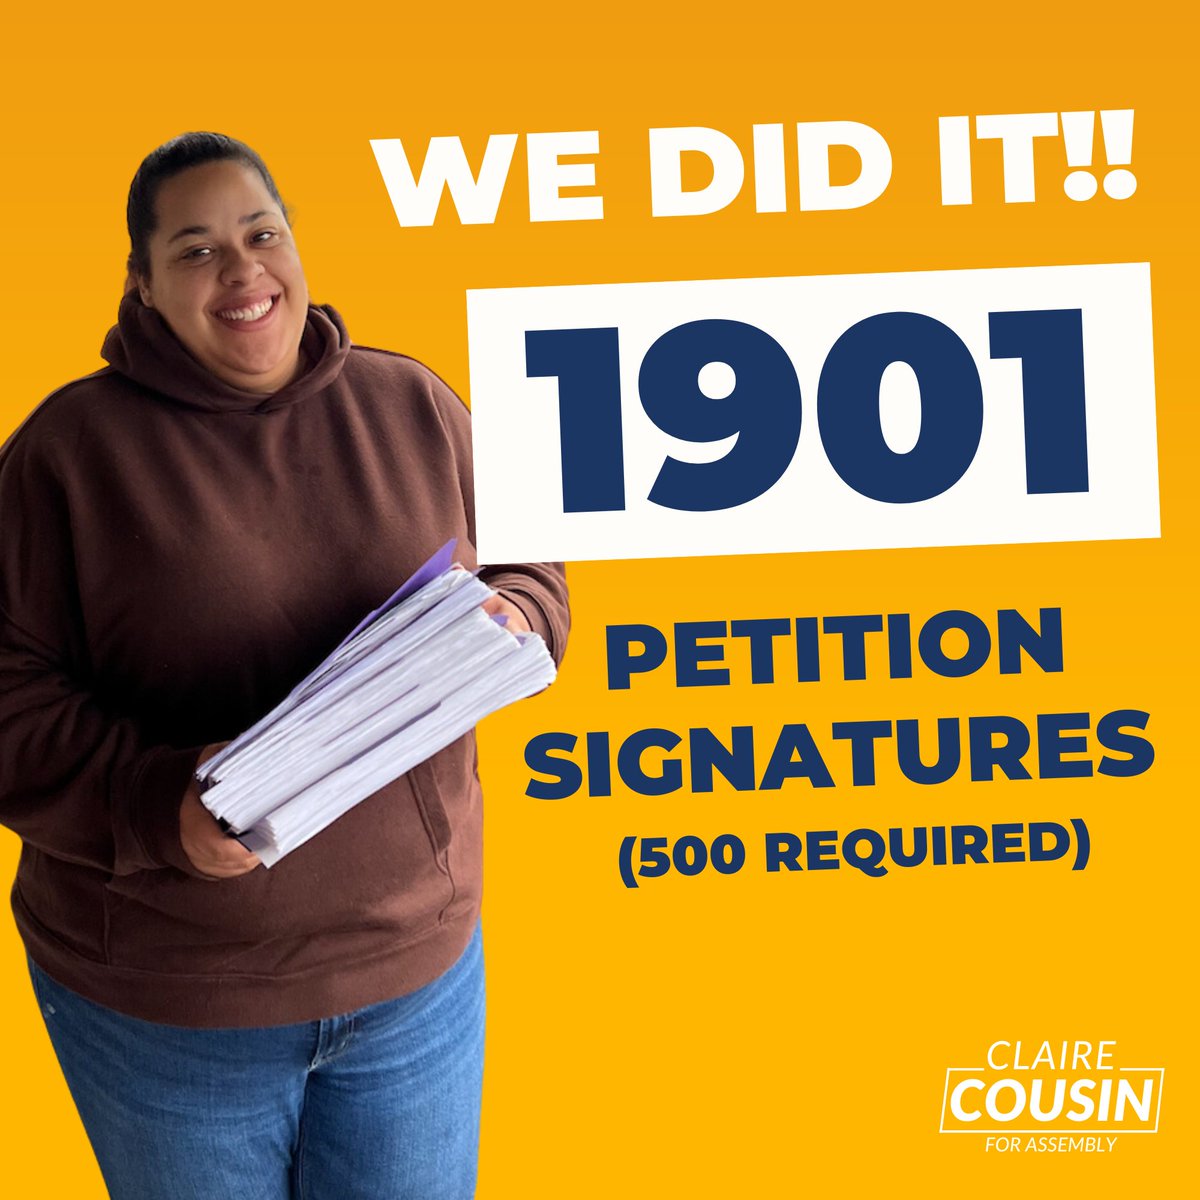 We CRUSHED our goal and submitted 1901 signatures to the Board of Elections to get on the ballot!! 🔥 Will you help us keep up the momentum by making a donation so we can reach our $5000 fundraising goal by April 8? ➡️ clairecousinforassembly.com/donate